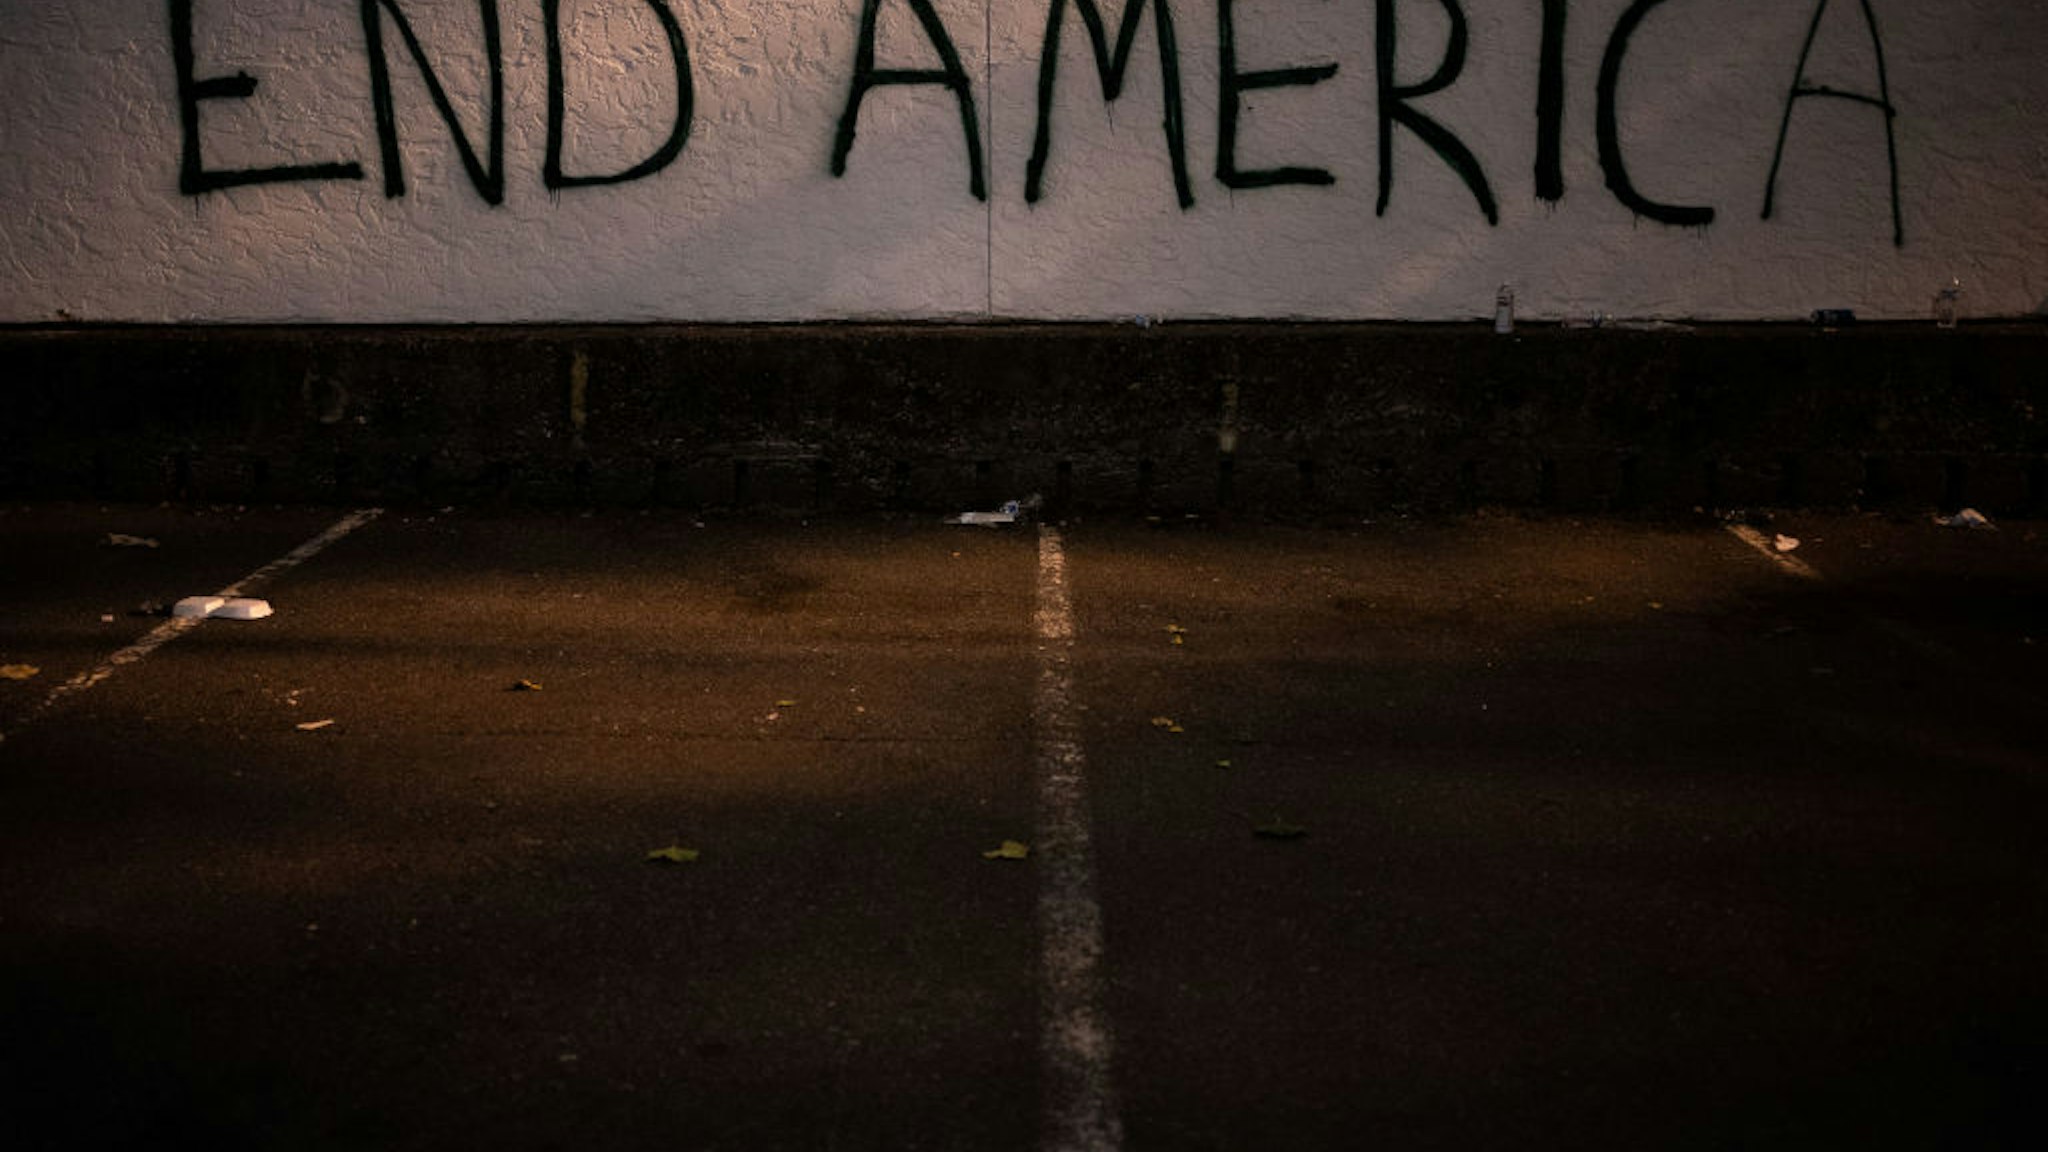 Graffiti is seen on a wall after demonstrators clashed with law enforcement near the Seattle Police Departments East Precinct shortly after midnight on June 8, 2020 in Seattle, Washington.